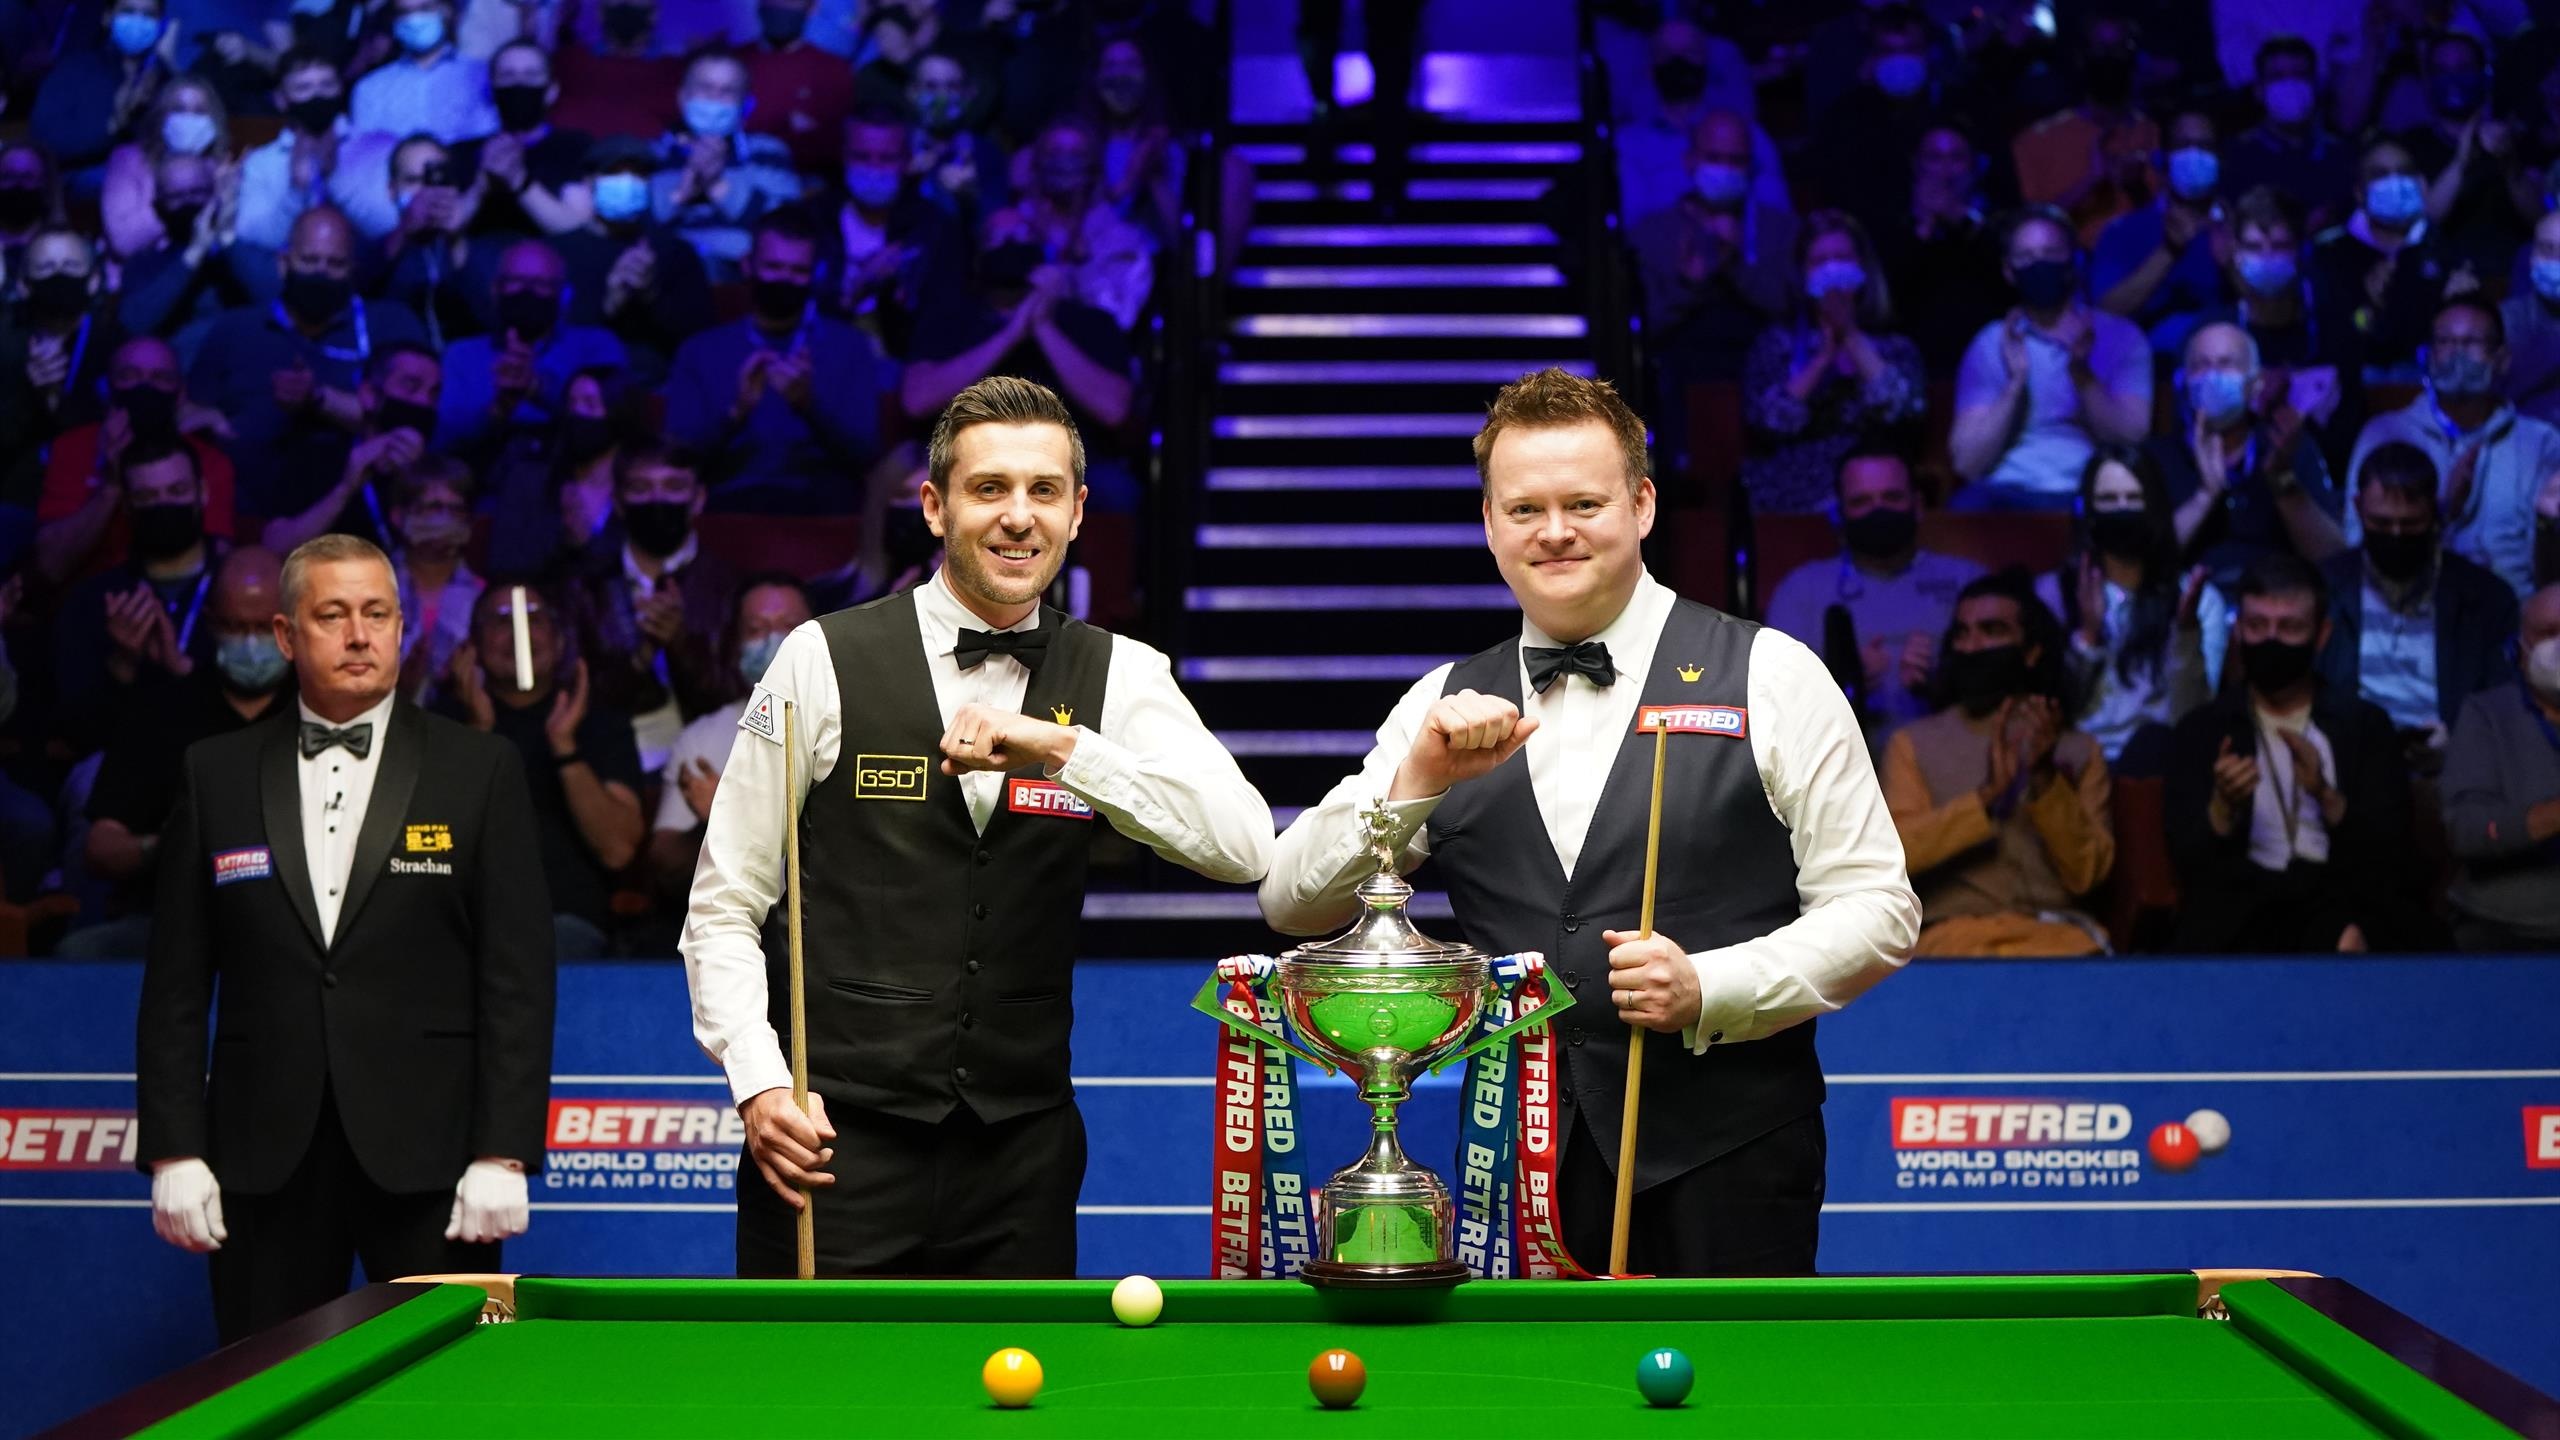 Snooker World Championship, Results and schedule, Crucible Theatre stage, Eurosport coverage, 2560x1440 HD Desktop